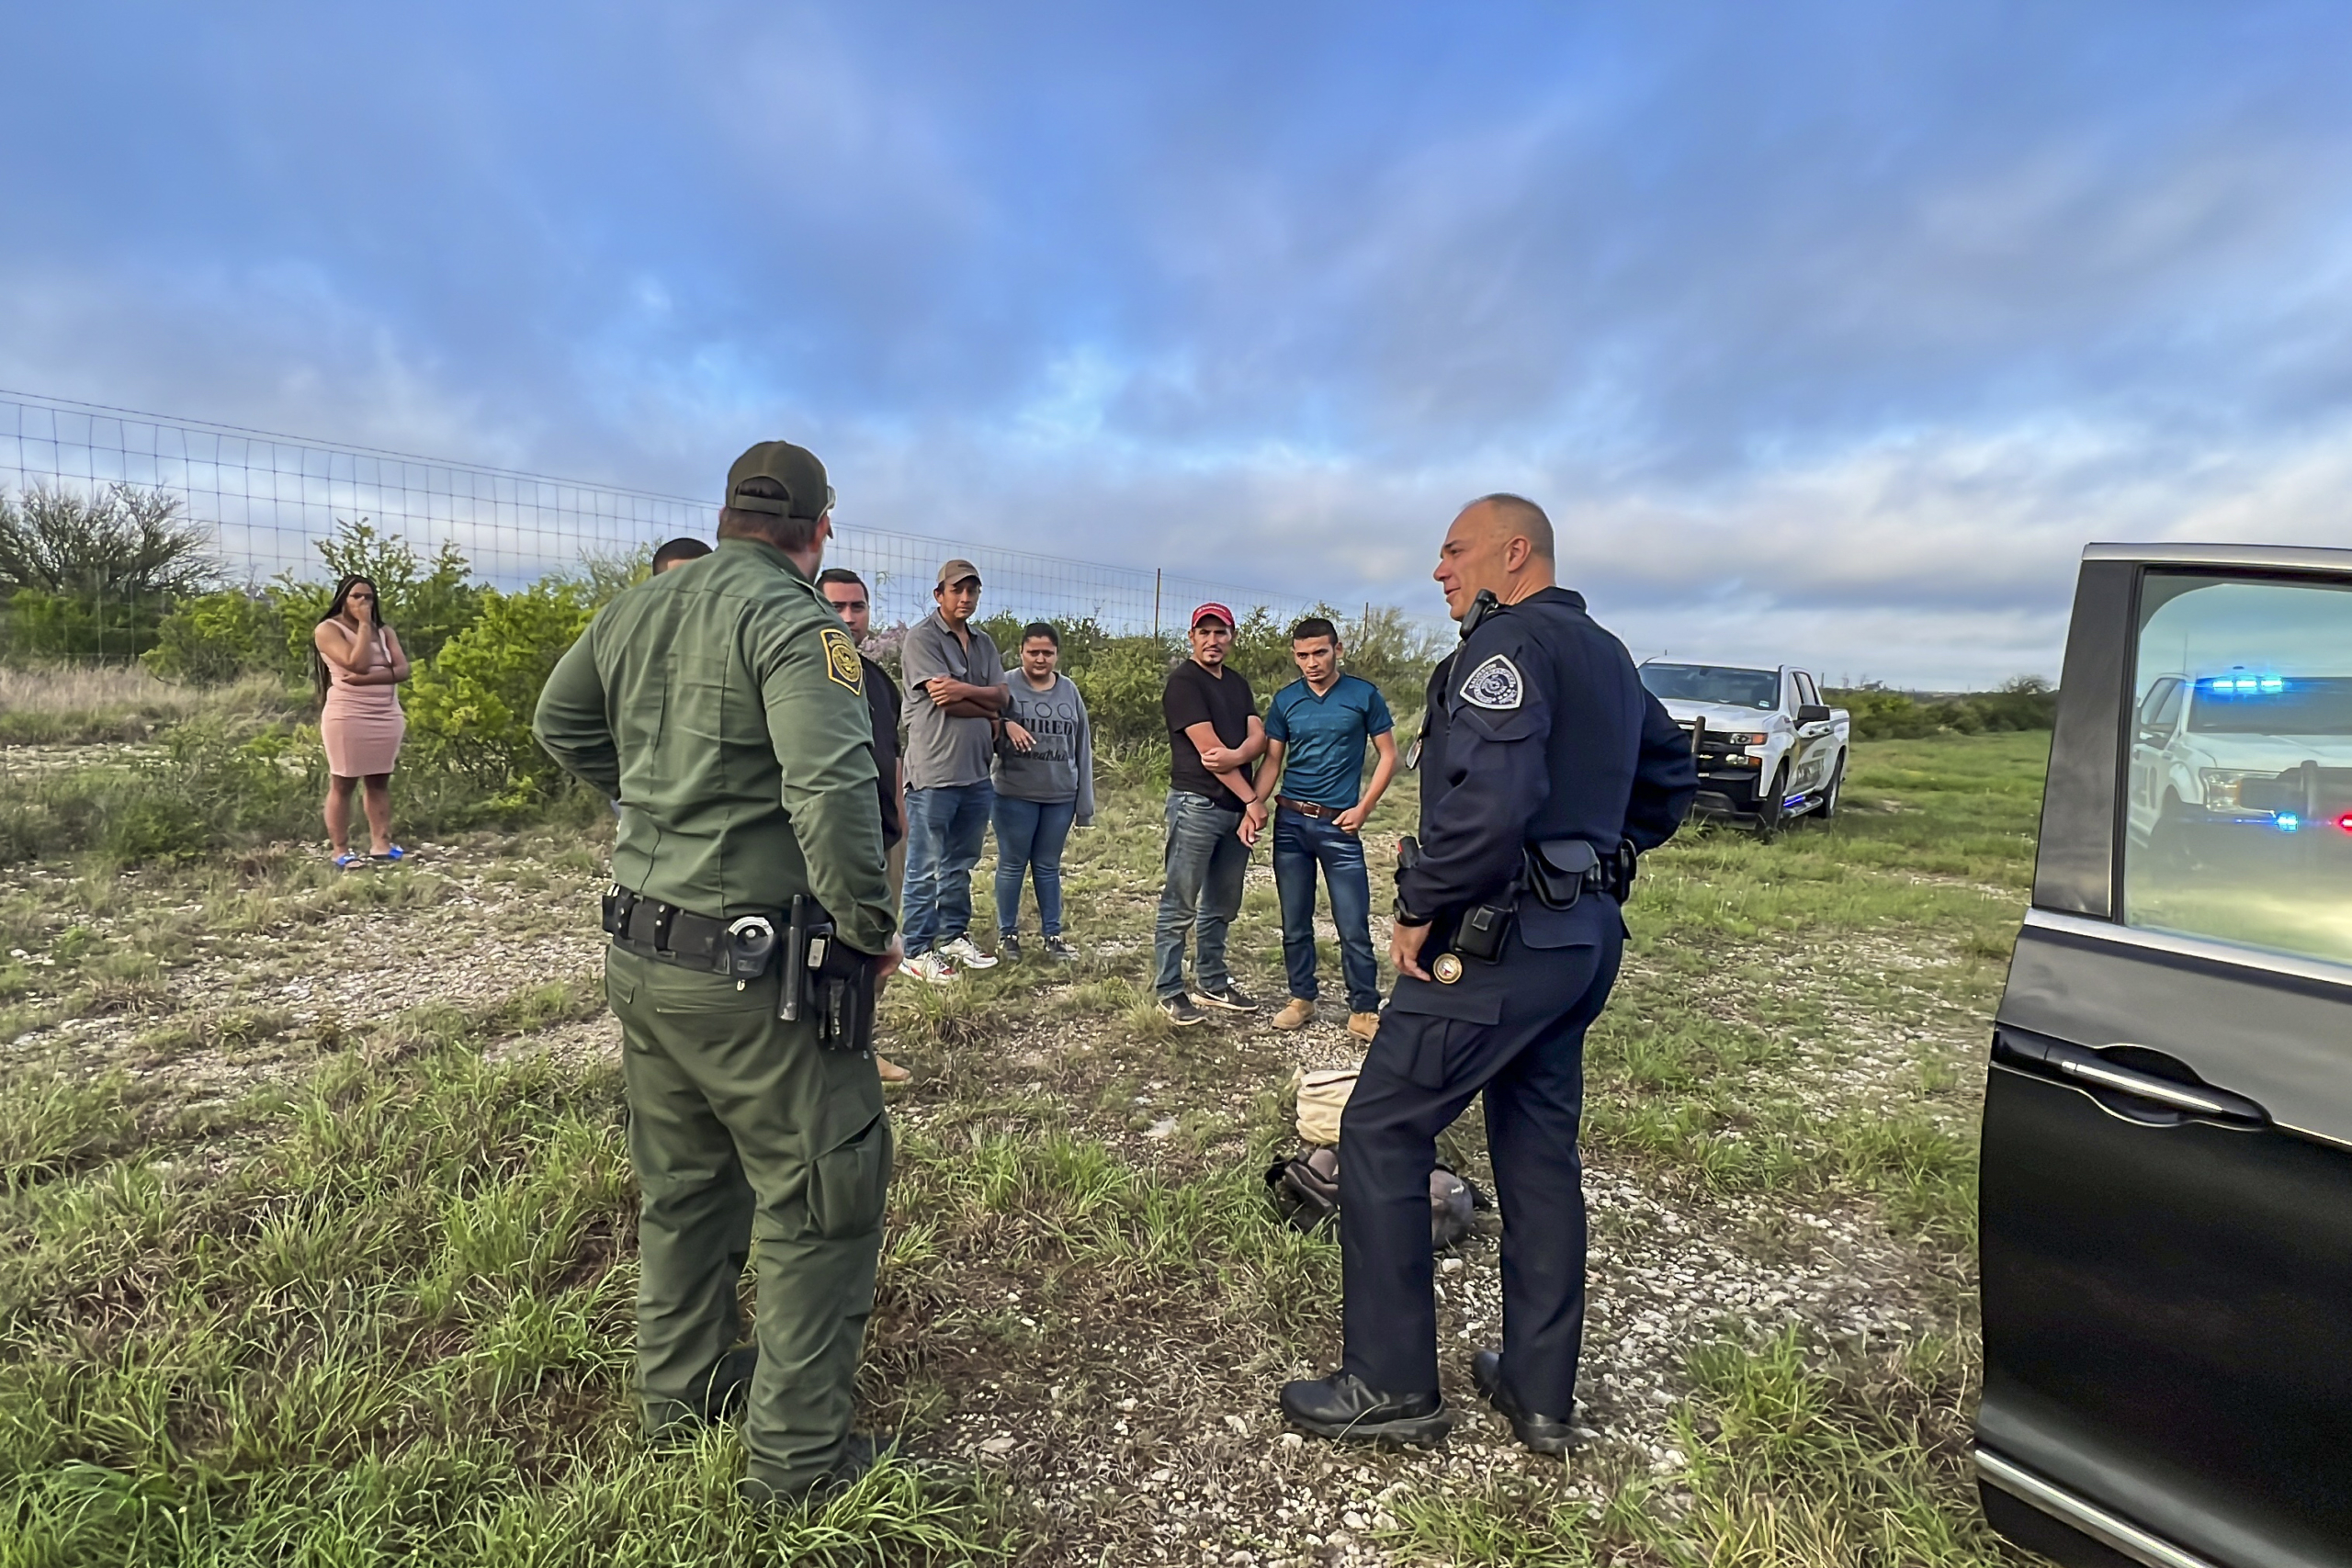 Illegal Immigrant Arrests at Border Soar in September, Set New Fiscal Year Record